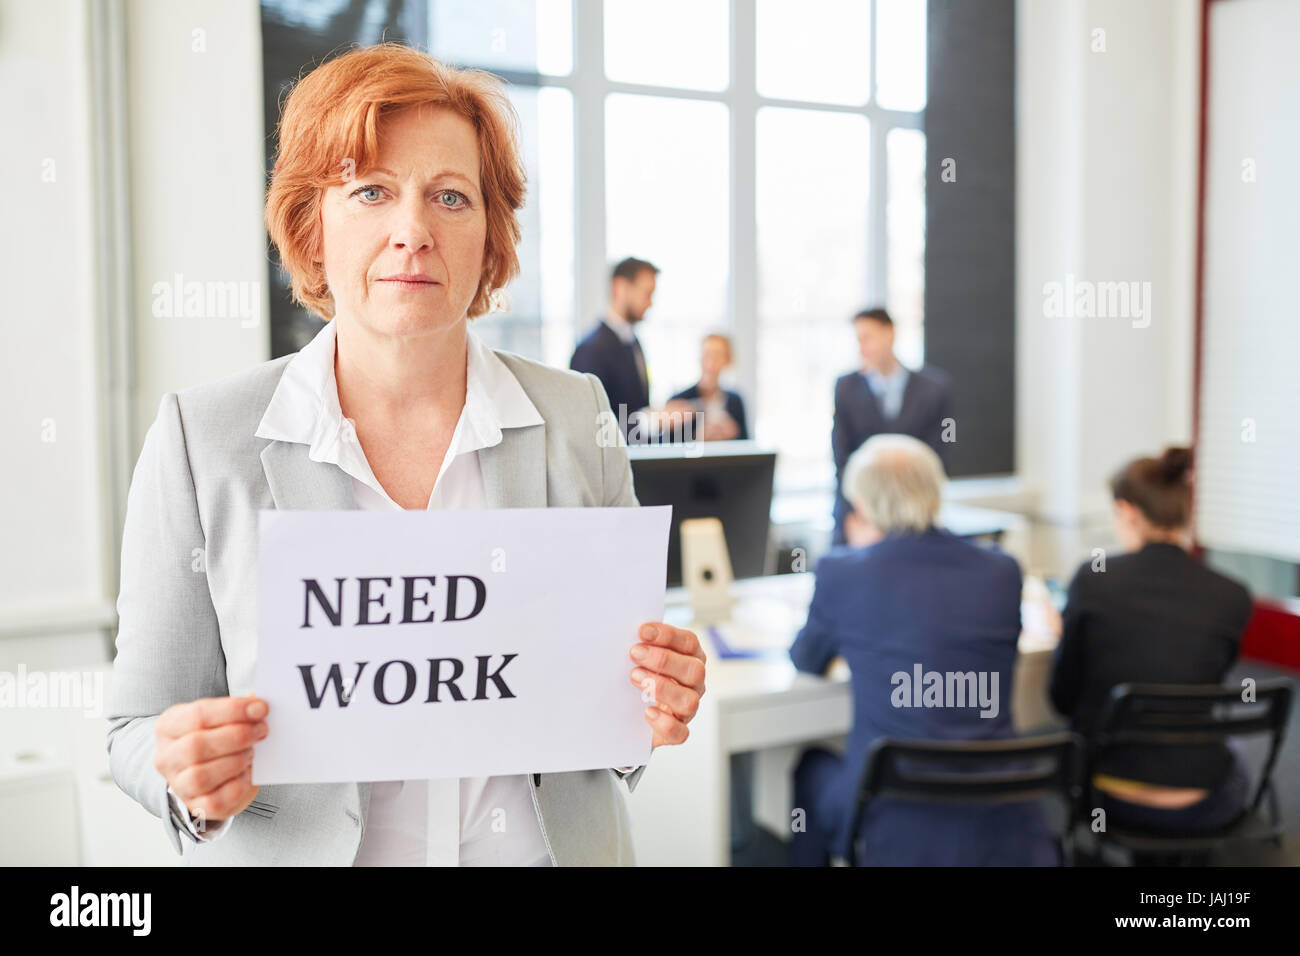 Senior business woman as unemployed candidate needs to find a job Stock Photo